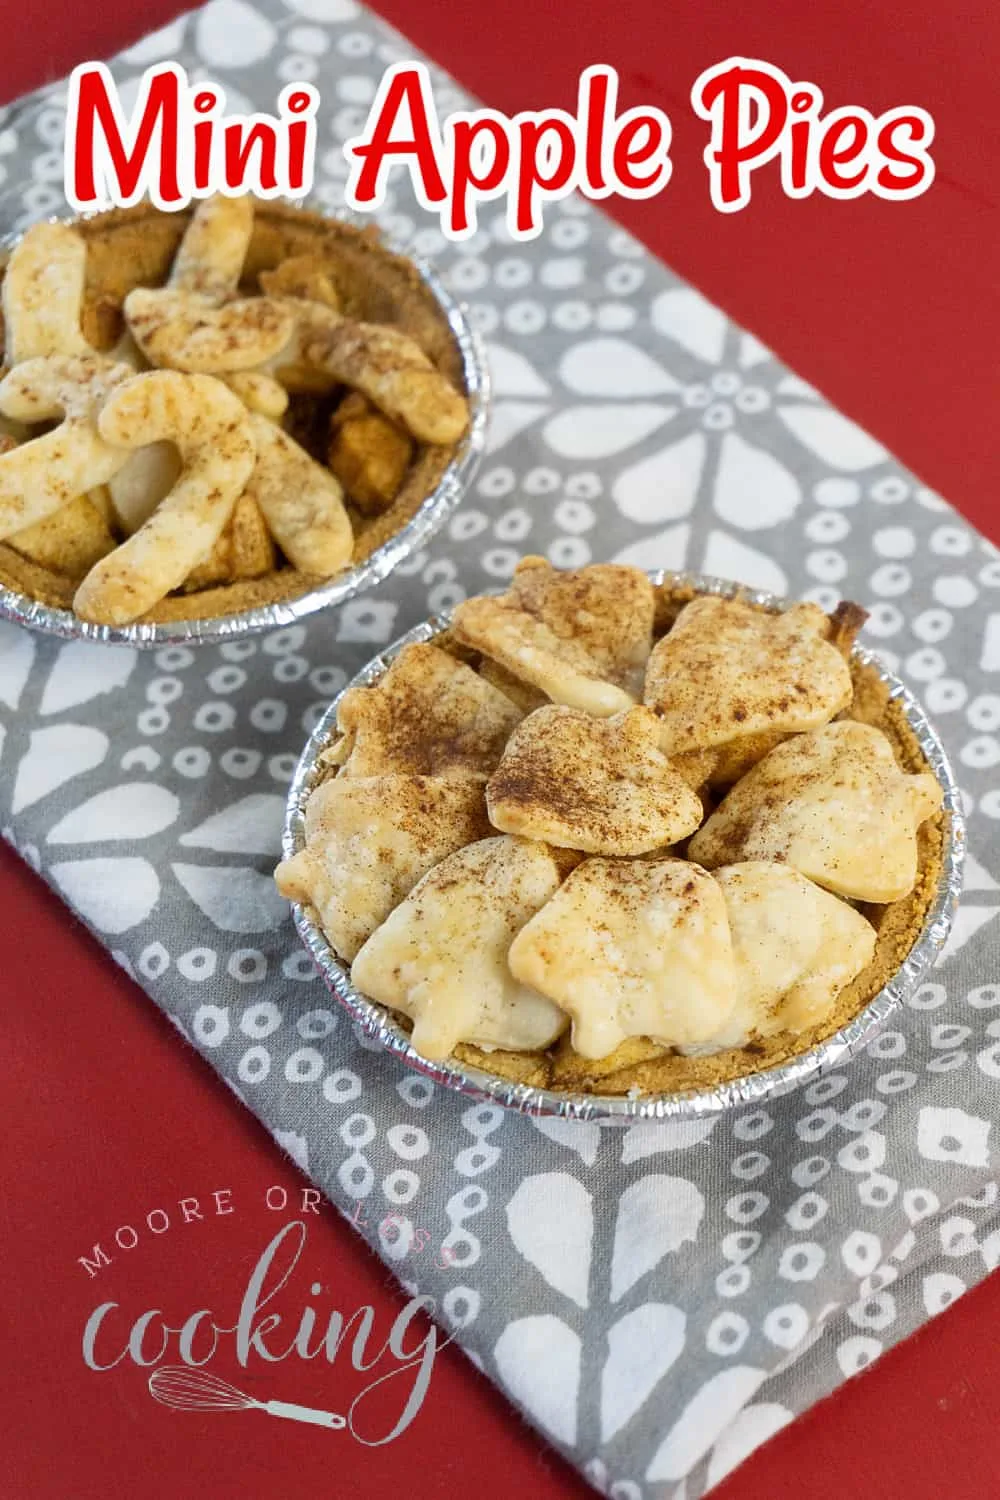 These adorable mini apple pies are perfect when you need a single-serve tasty treat. Just like a full-sized pie, the miniature crust holds deliciously spiced bites of fresh apples that are topped with holiday-shaped pie crust cutouts. via @Mooreorlesscook